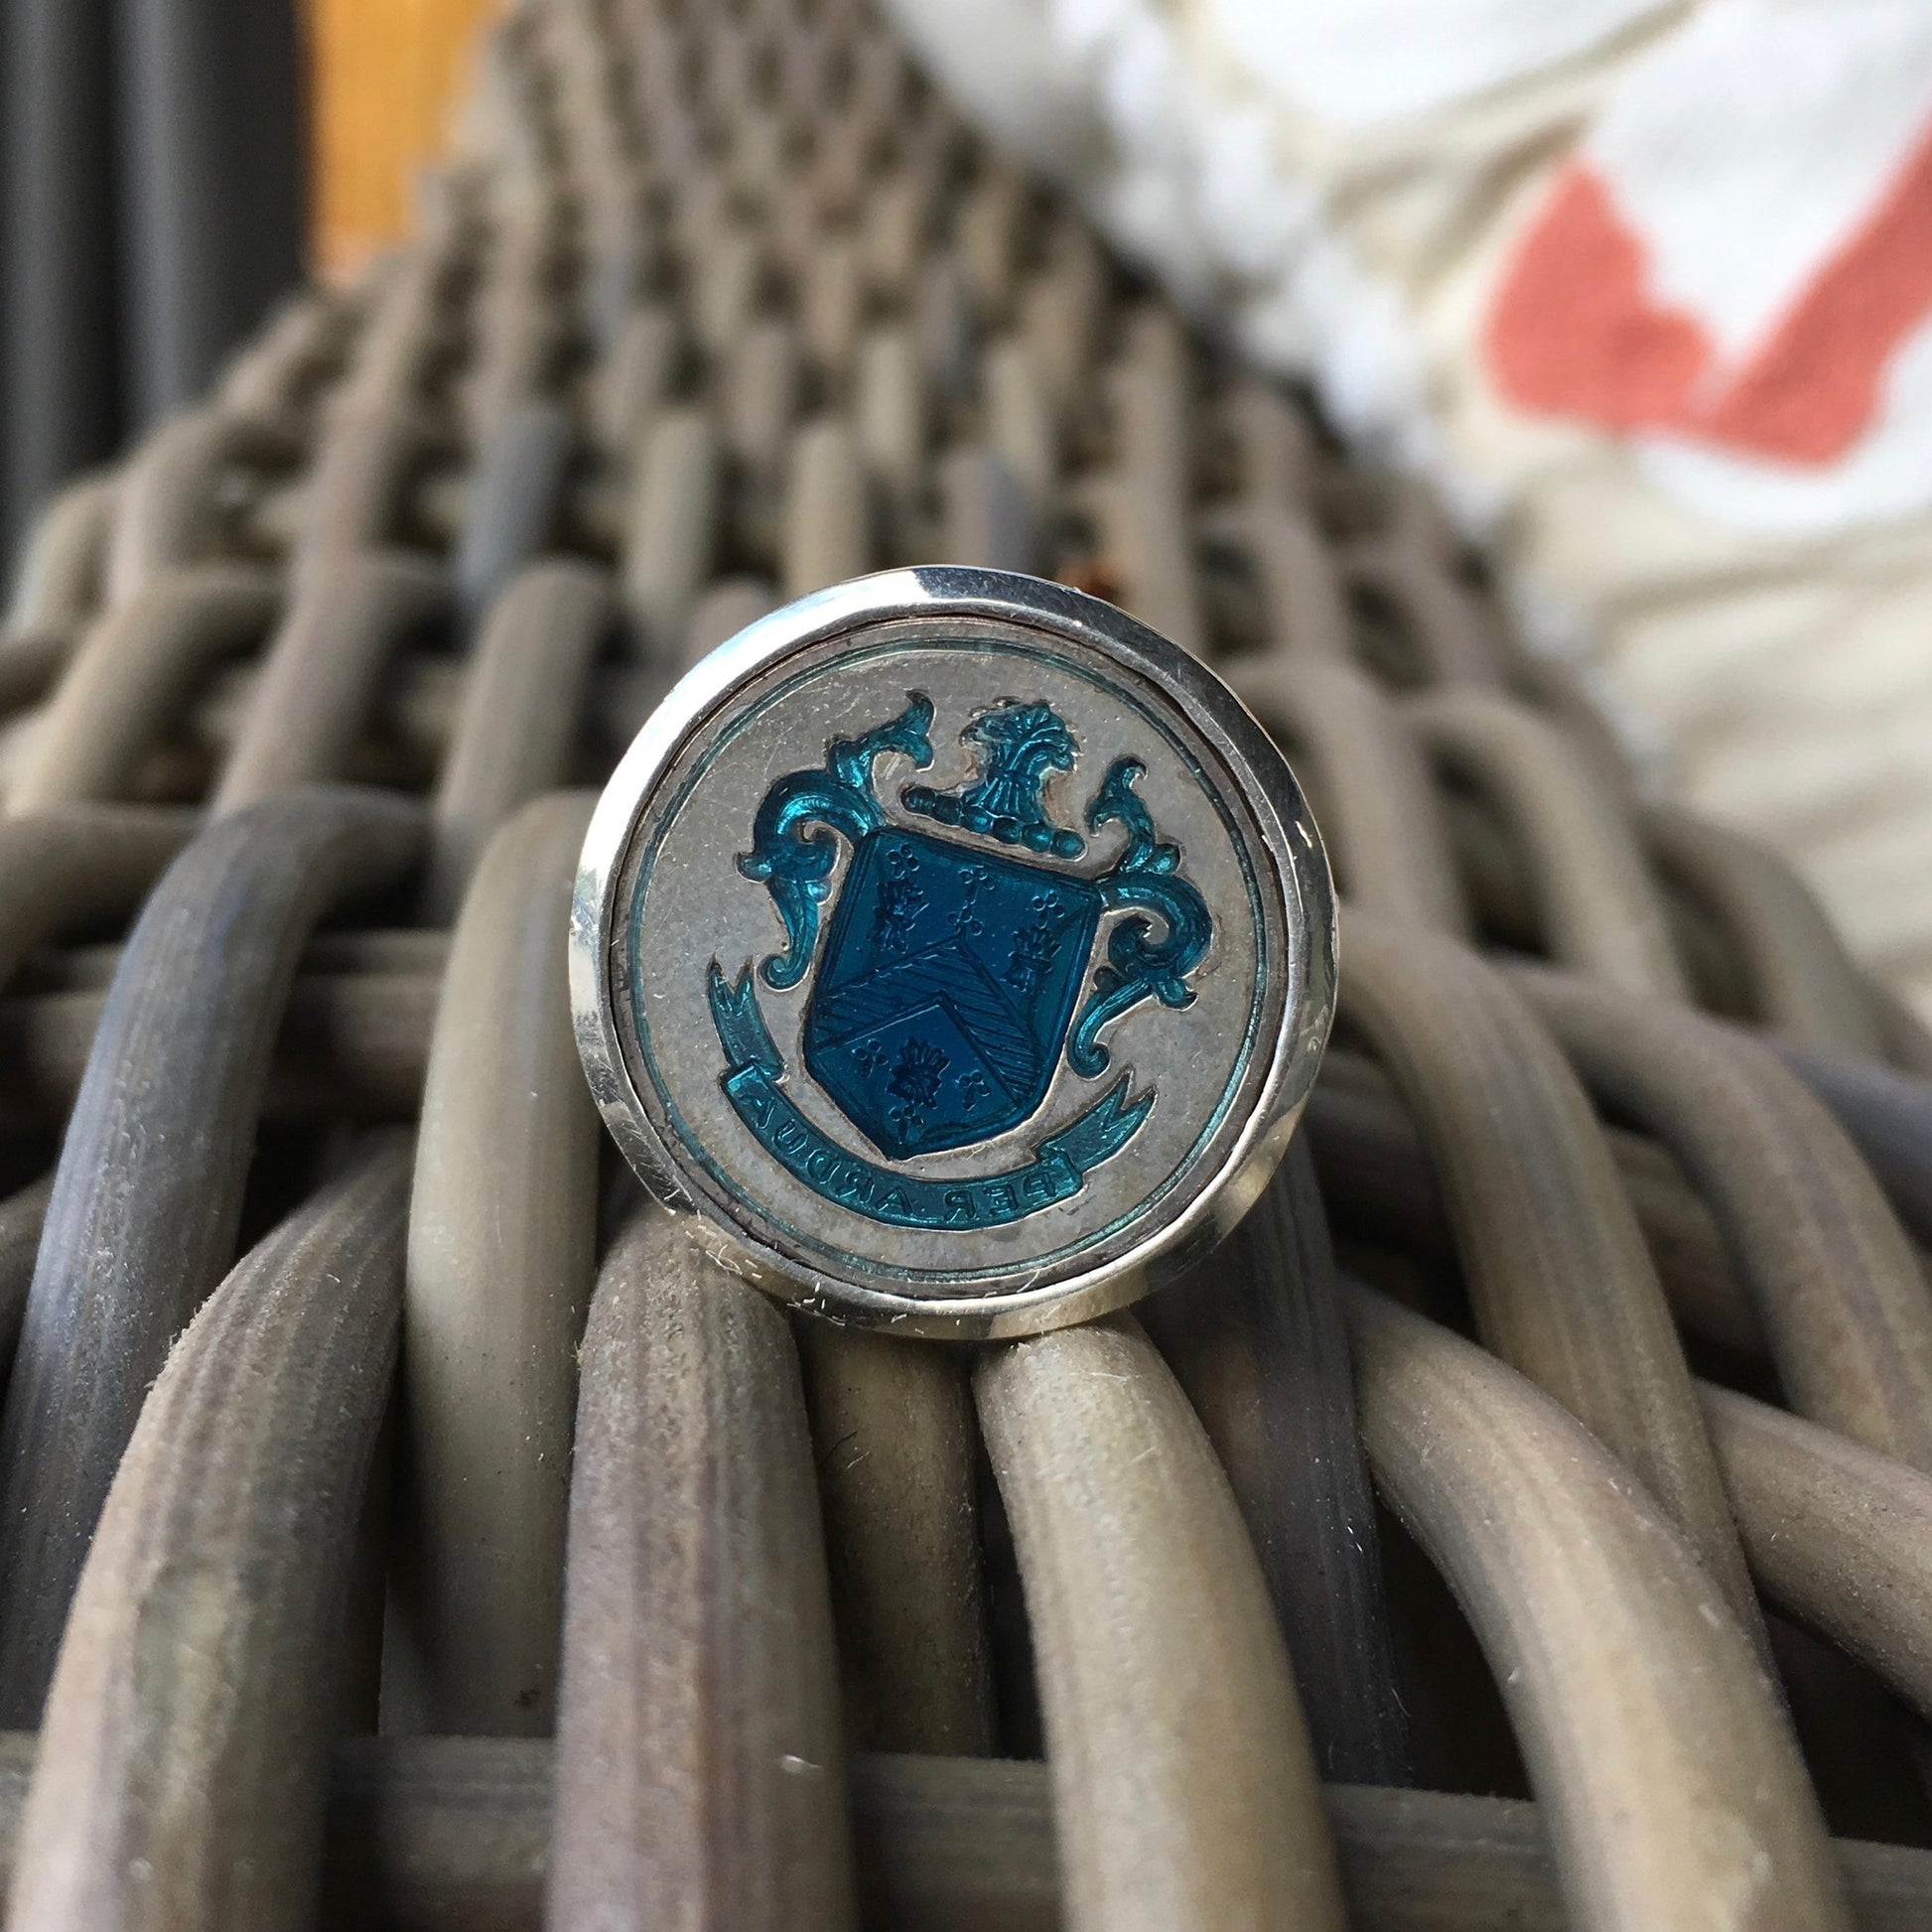 Vintage Antique Silver Signet Coat of Arms Crest Blue Enamel Ring - Hashtag Watch Company